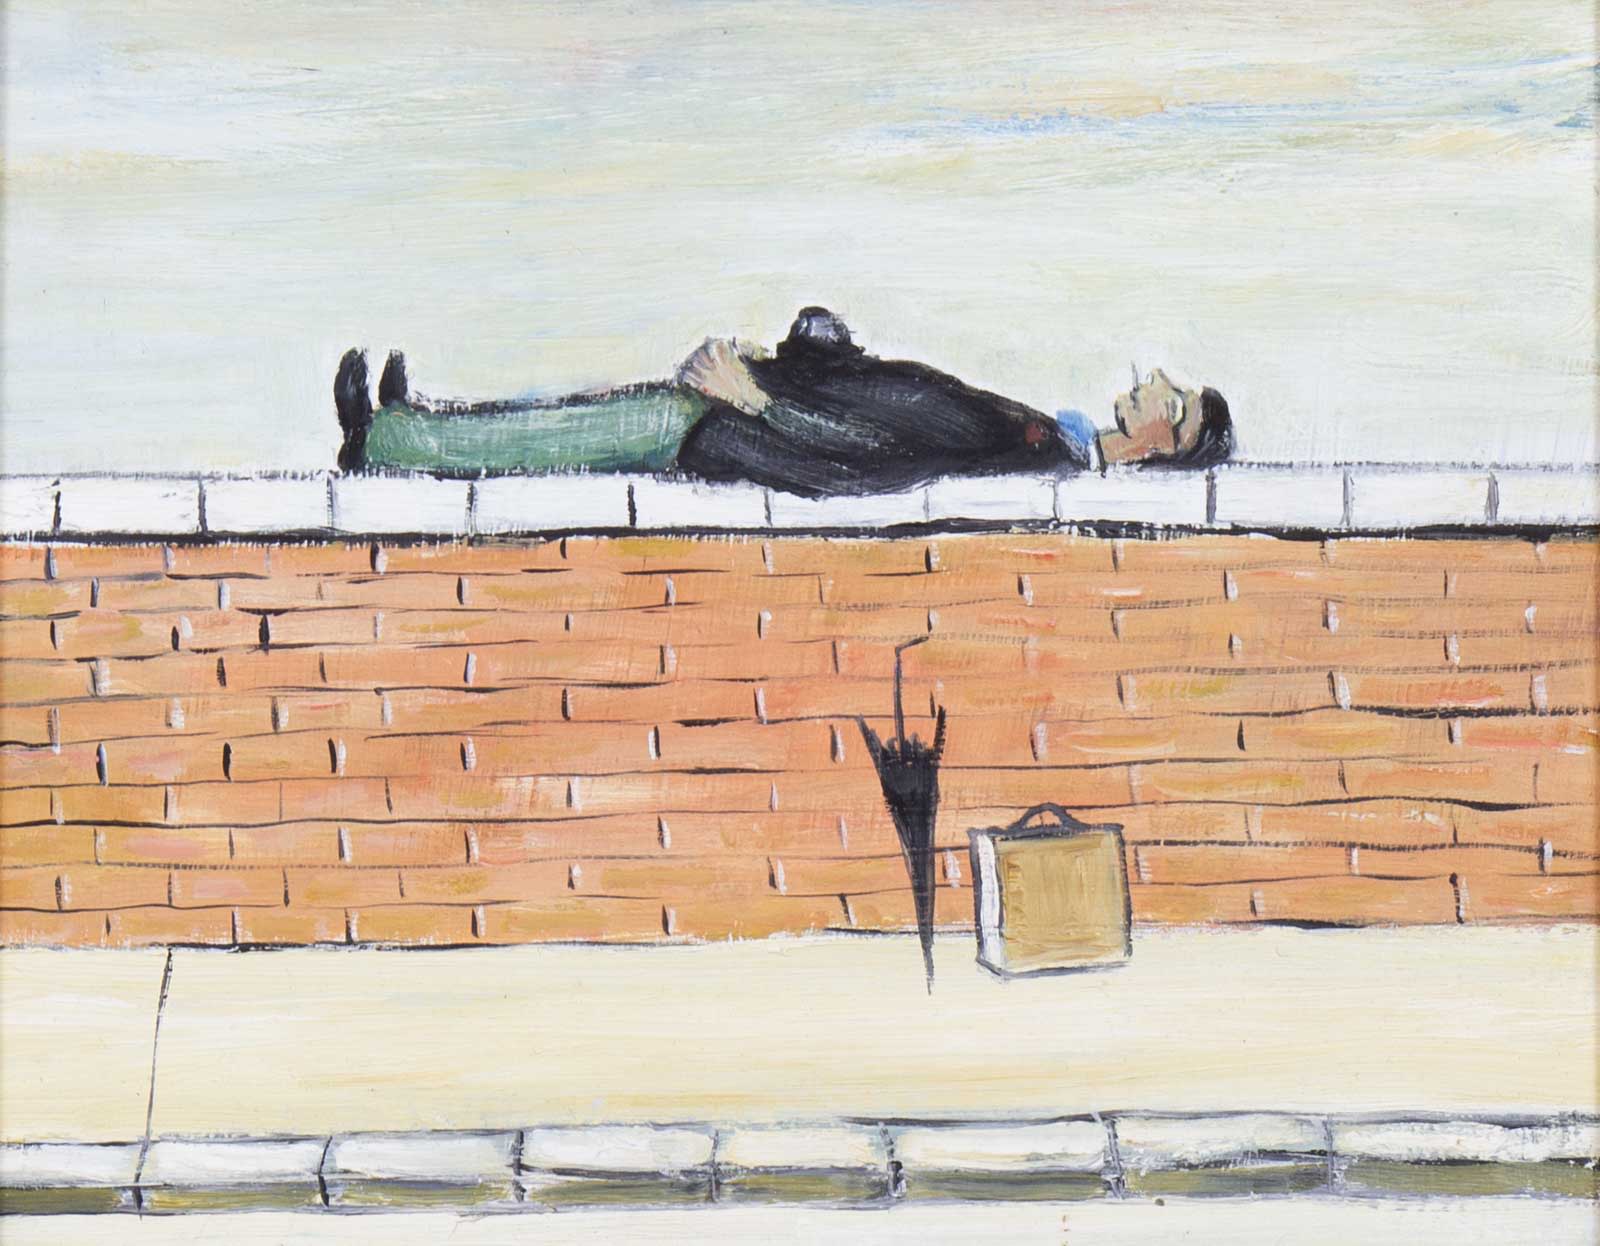 Man on Wall after L.S.Lowry